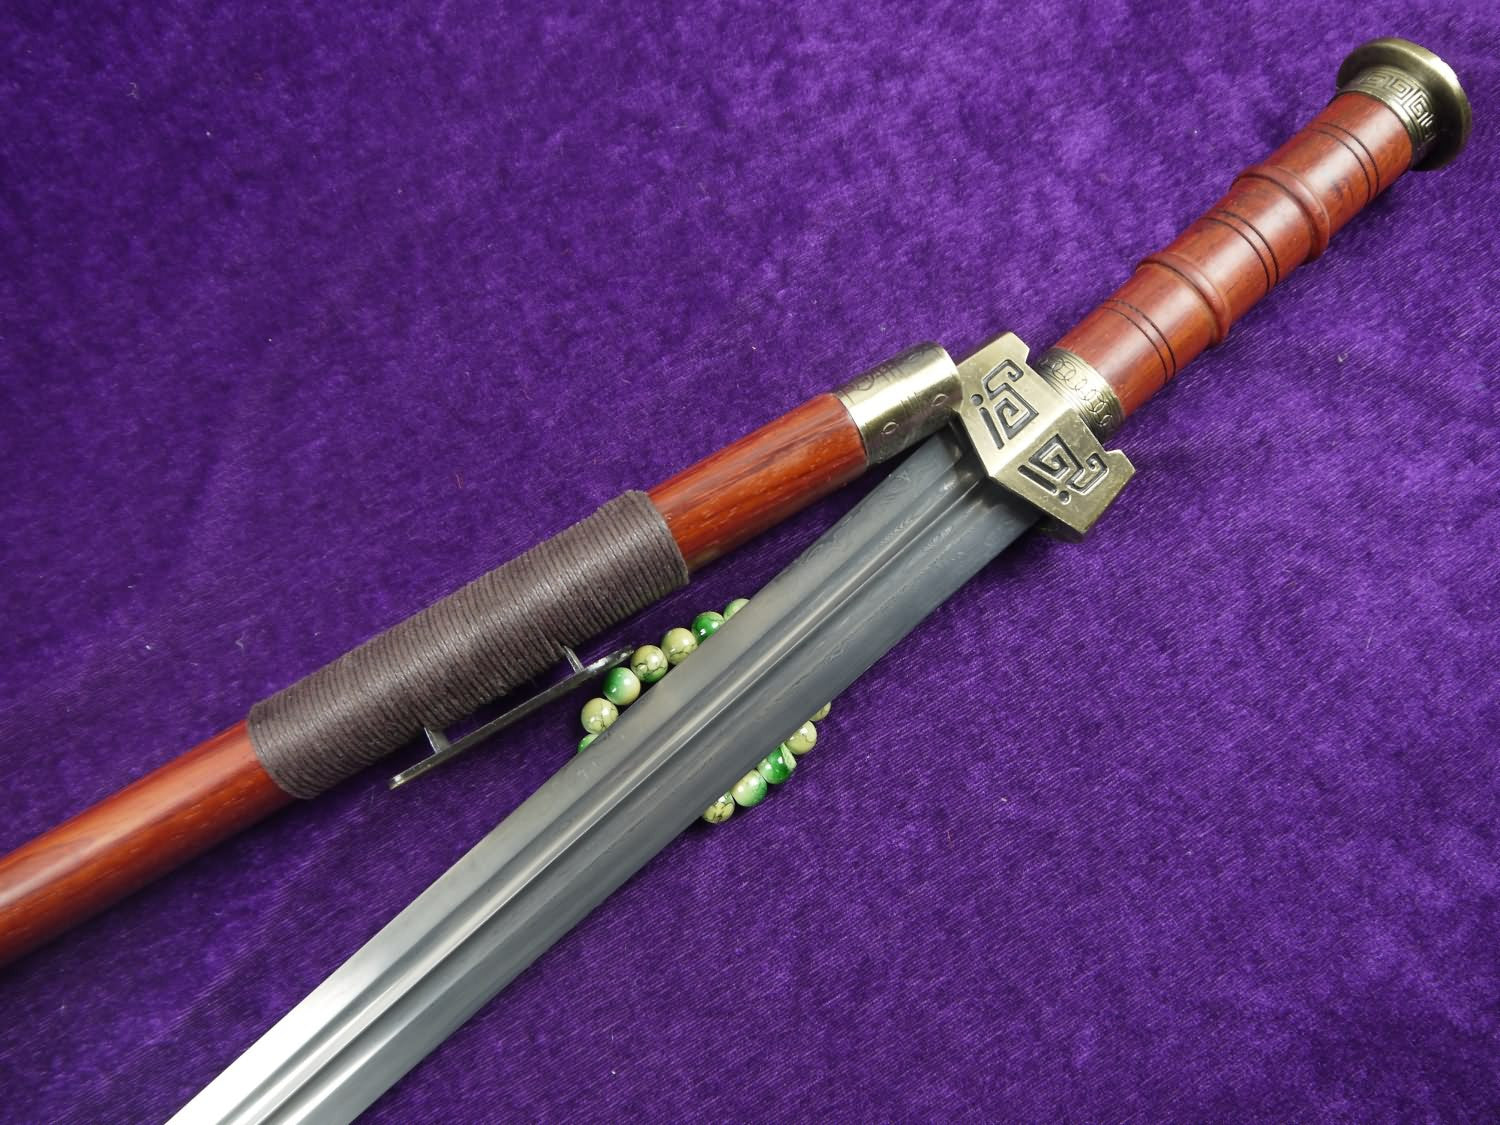 Qin sword,Folding steel blade,Redwood scabbard,Alloy fitting,Length 30 inch - Chinese sword shop